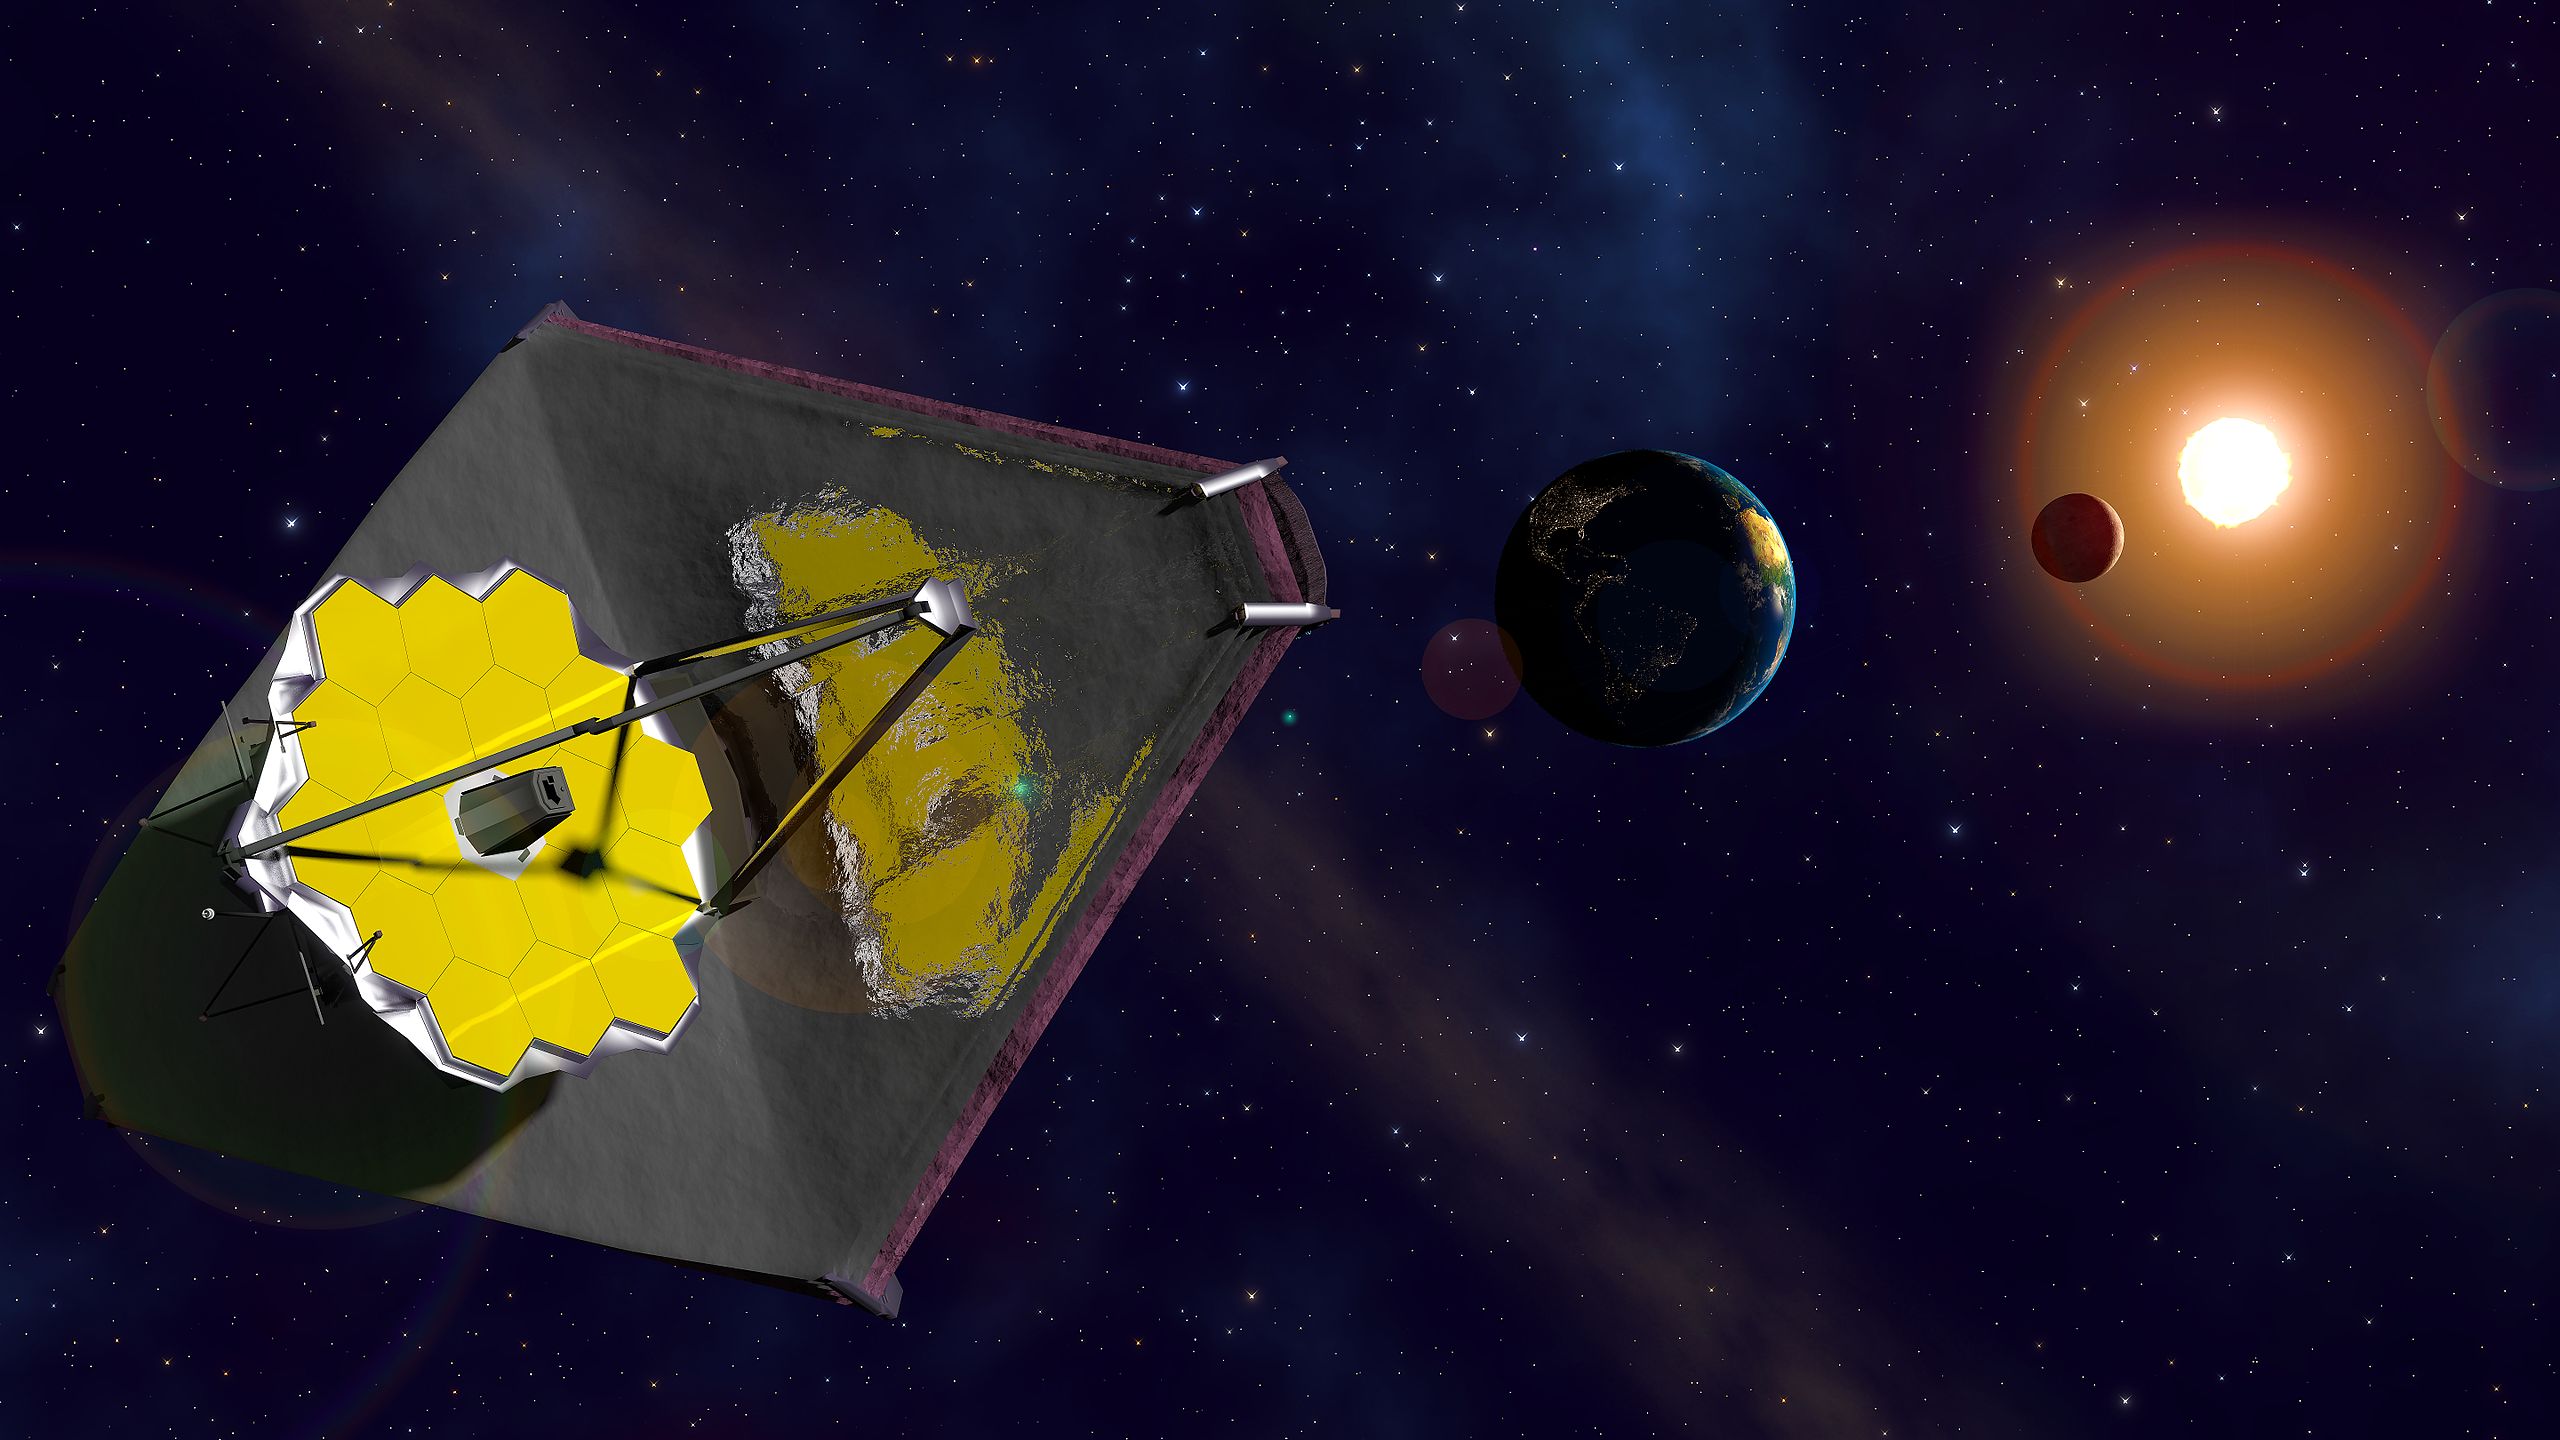 What Is Special About James Webb Space Telescope?